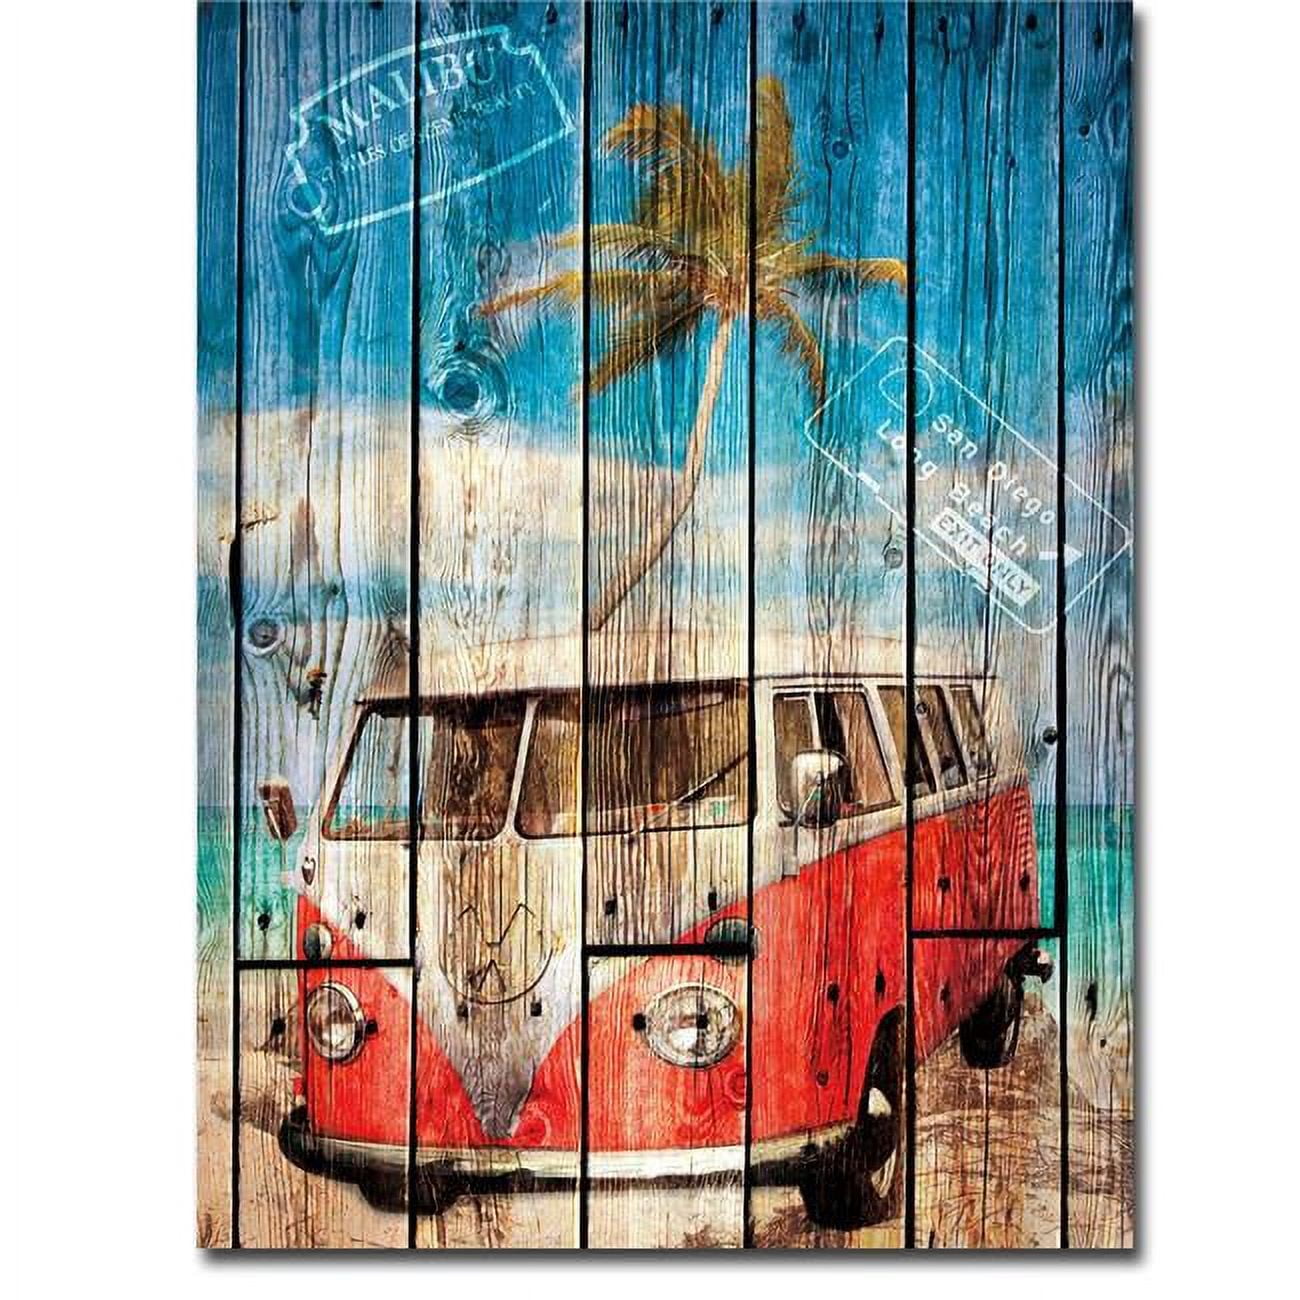 1216am968cg La Playa By Bresso Sola Premium Gallery-wrapped Canvas Giclee Art - 12 X 16 X 1.5 In.